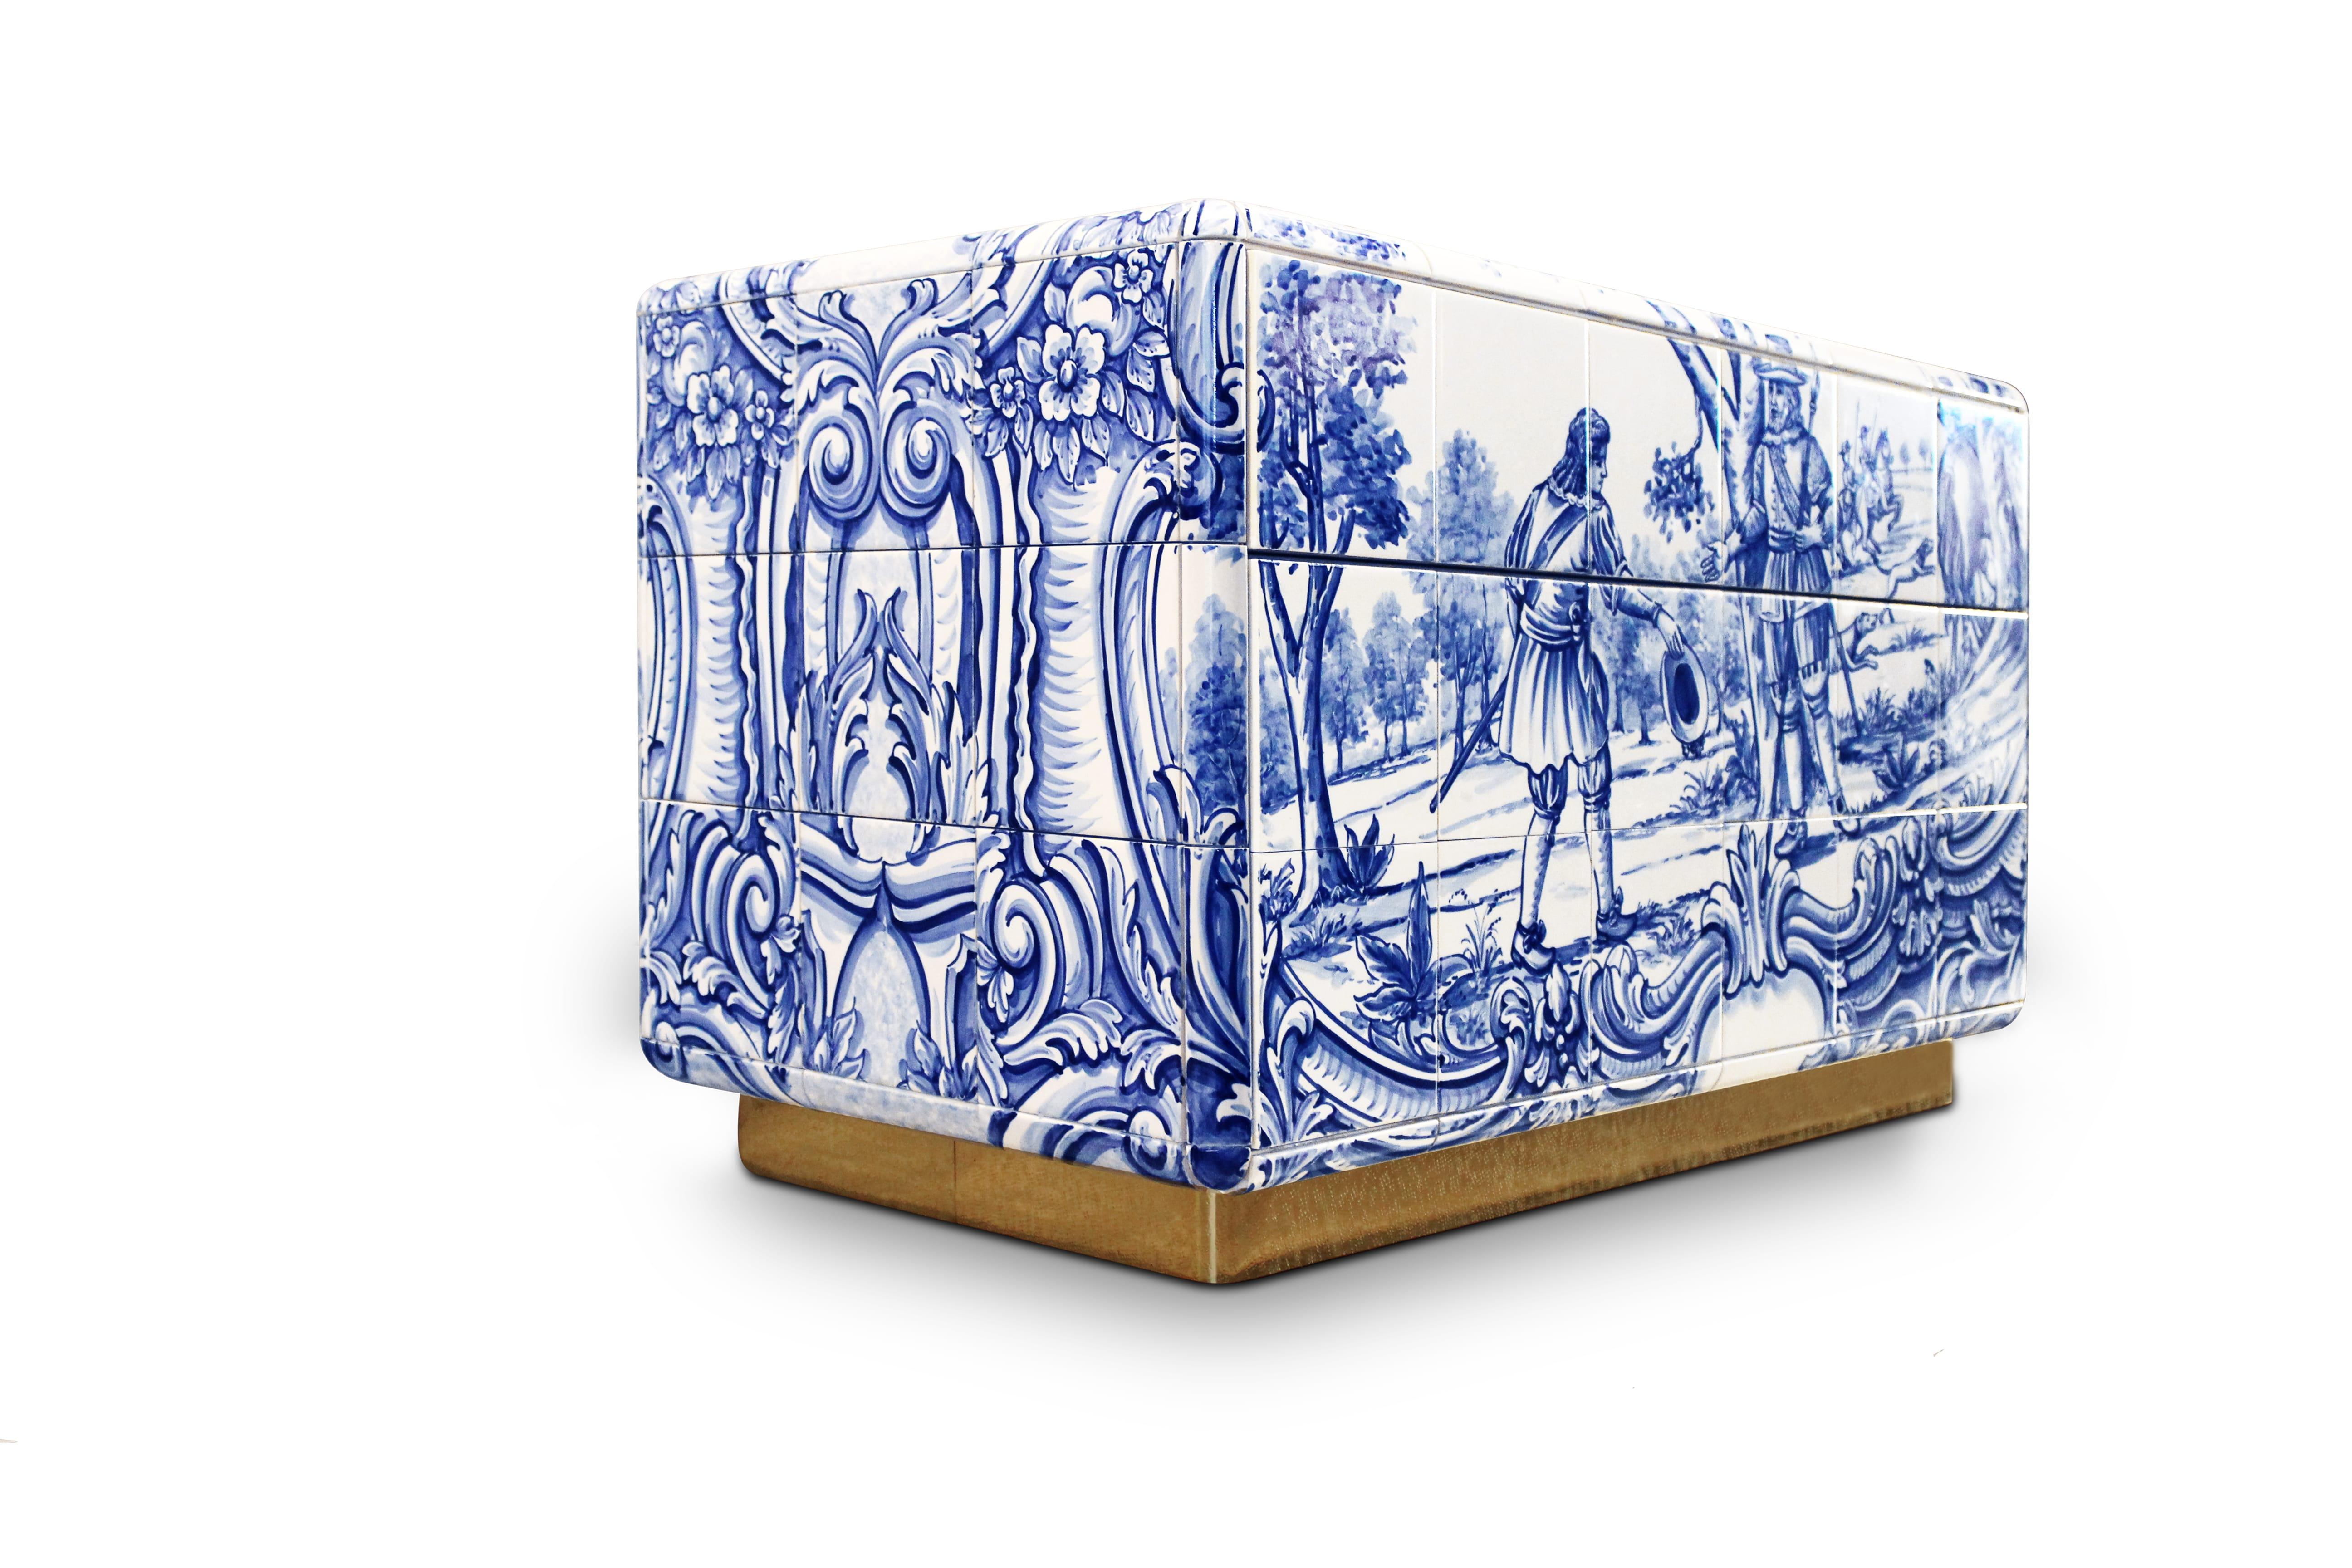 The Heritage nightstand is influenced by the Azulejo, a landmark in Portuguese culture. Originating from the Arabic word zellige, this traditional hand painted tile that can be found all over the country, from churches, to houses and gardens and was